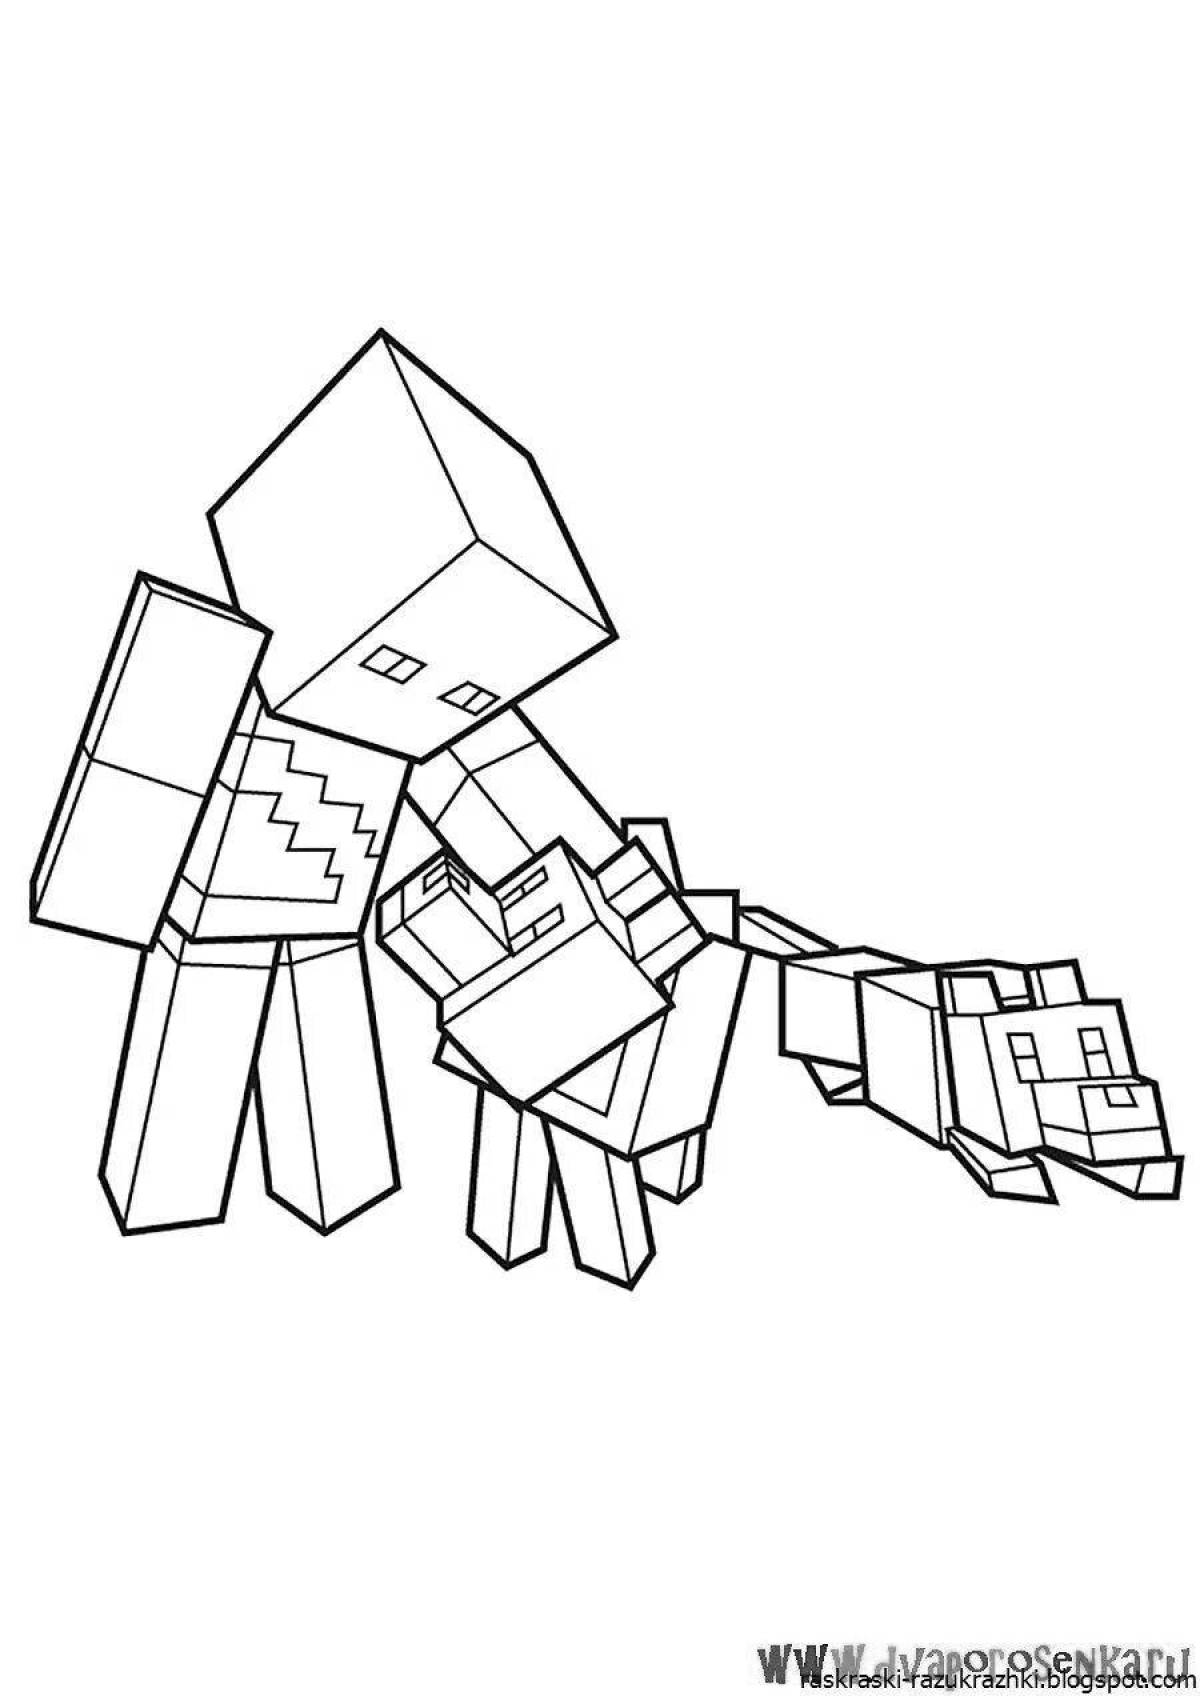 Cute minecraft fox coloring page